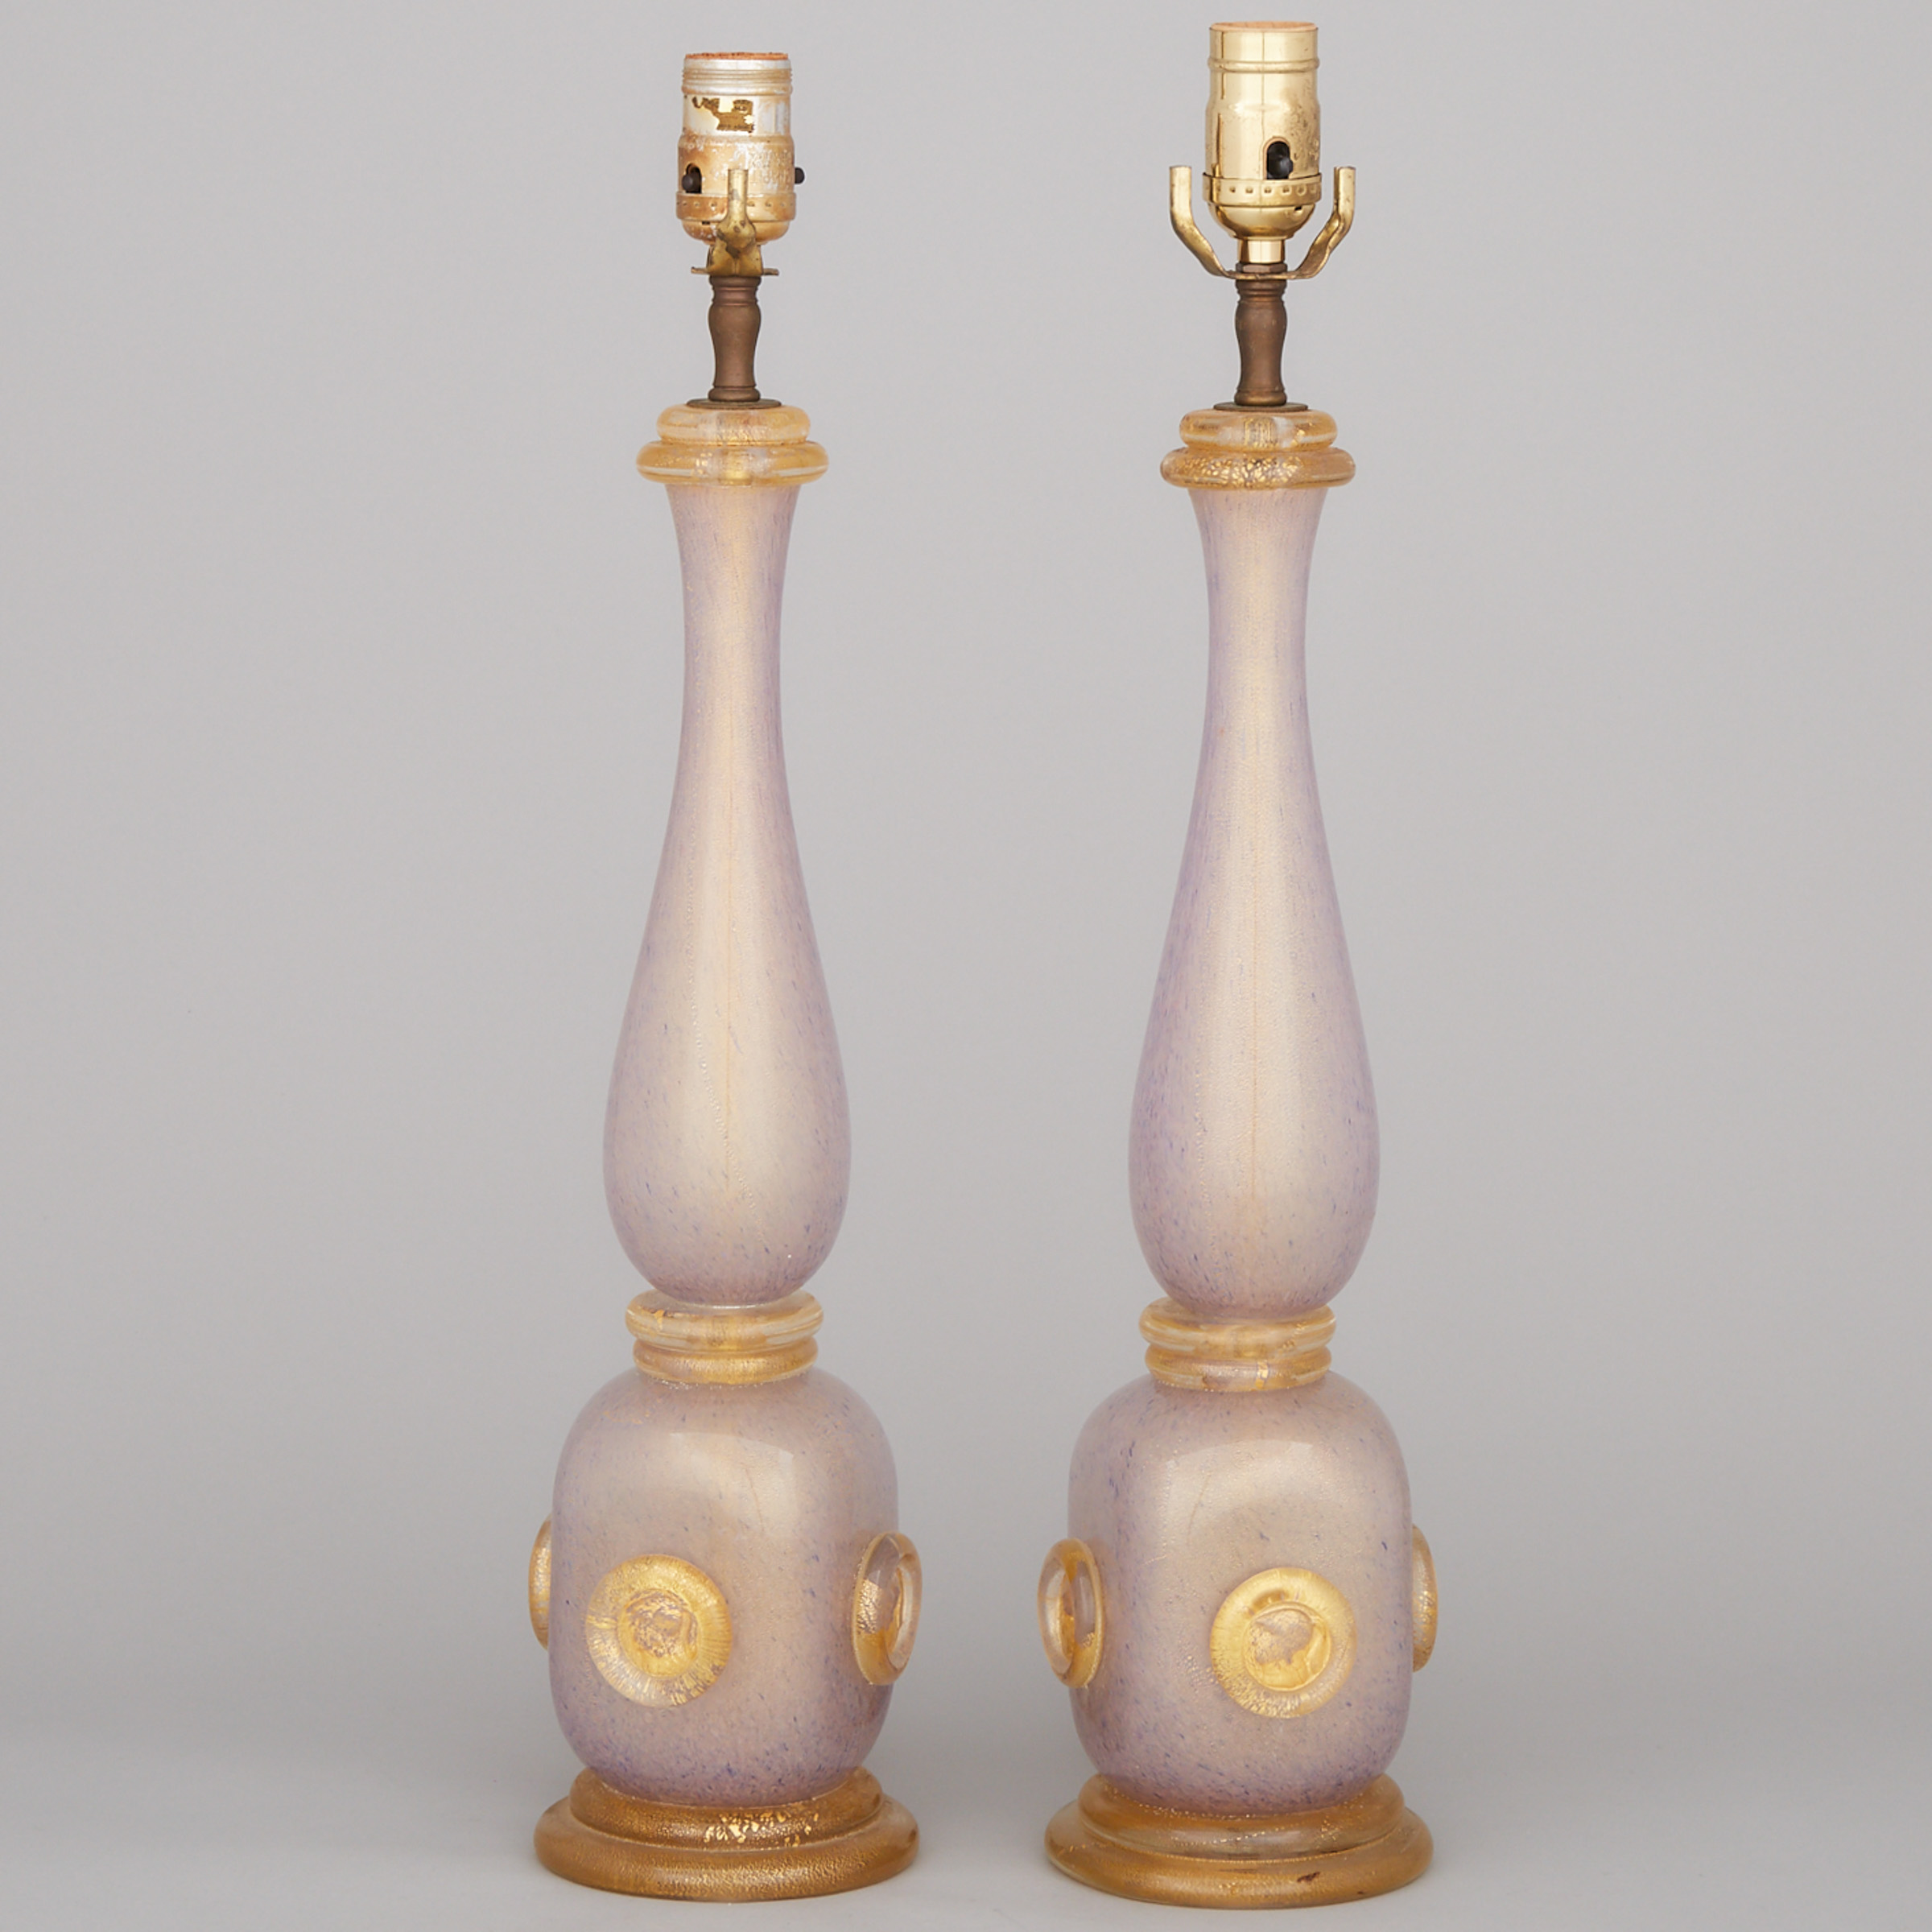 Pair of Barovier & Toso Mottled Amethyst and Gold Aventurine Glass Table Lamps, mid-20th century